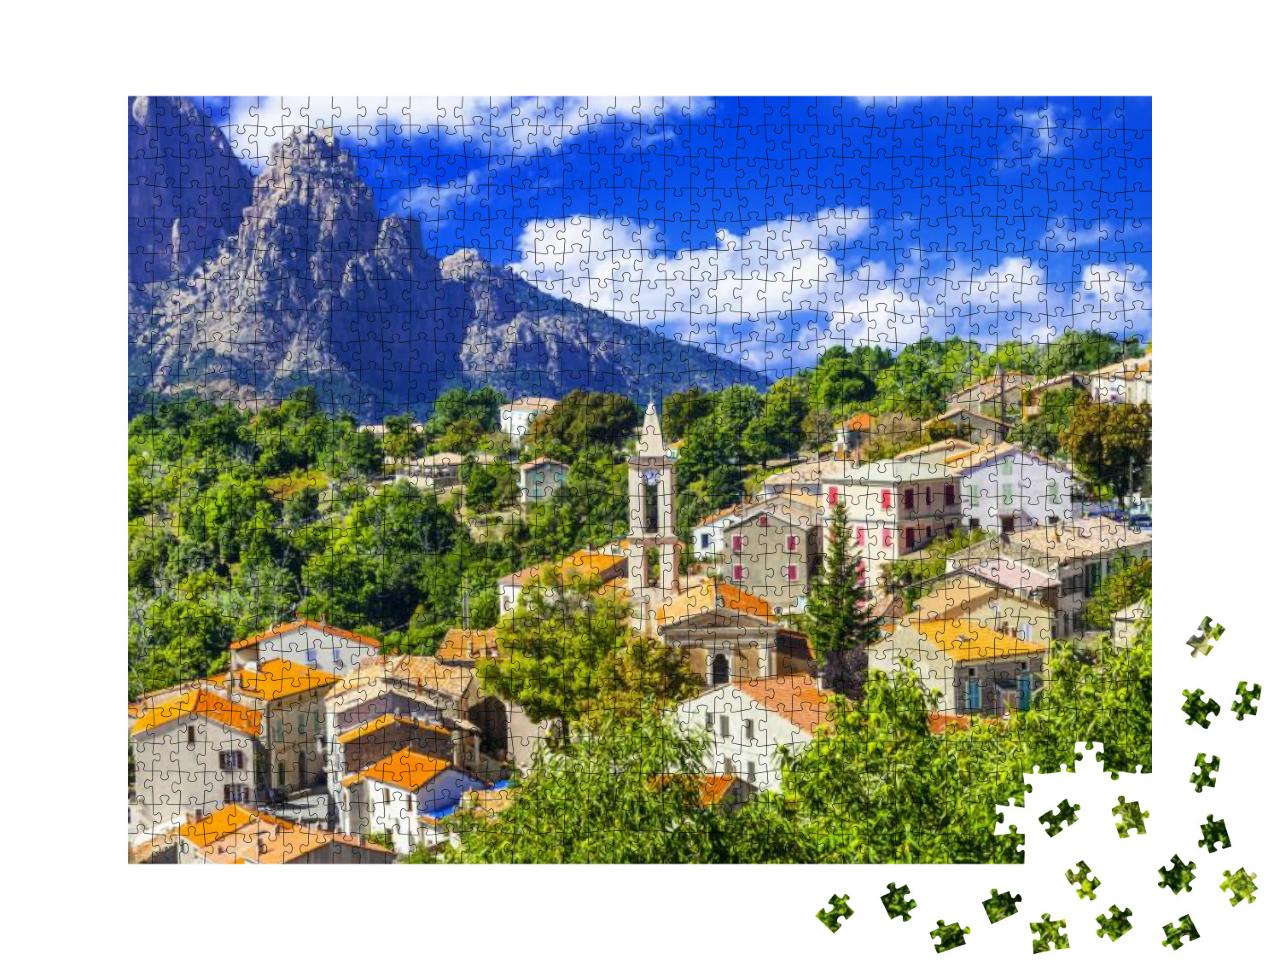 Evisa -Pictorial Mountain Village in Corsica... Jigsaw Puzzle with 1000 pieces